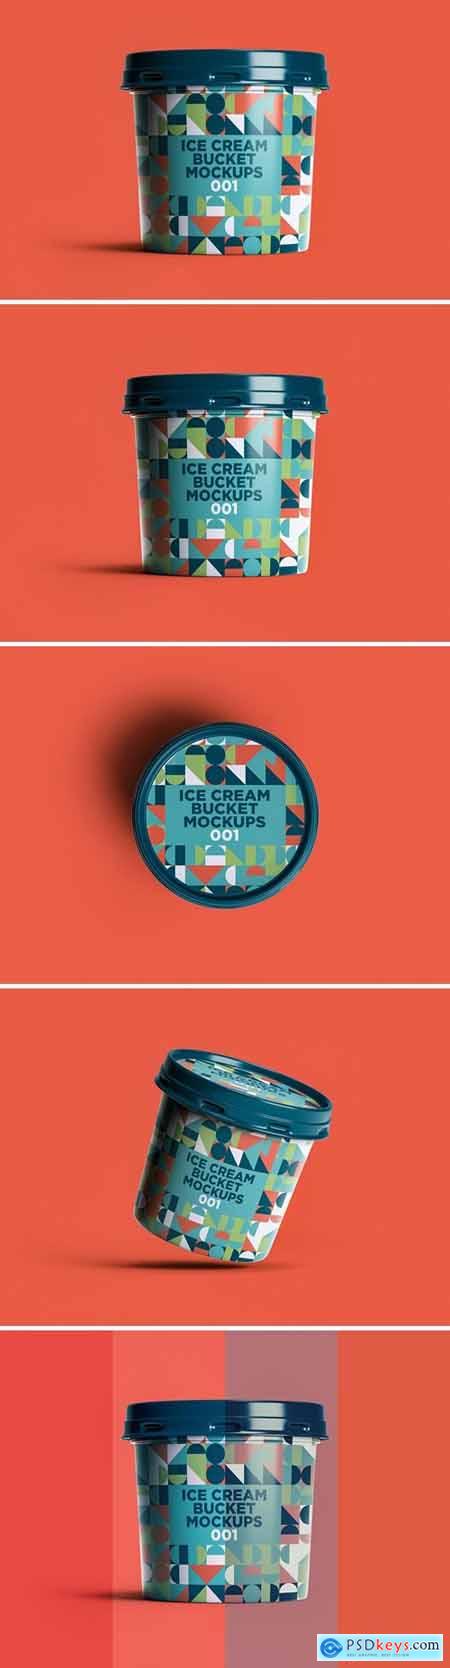 Download Logo and Product Mock-ups » page 146 » Free Download Photoshop Vector Stock image Via Torrent ...